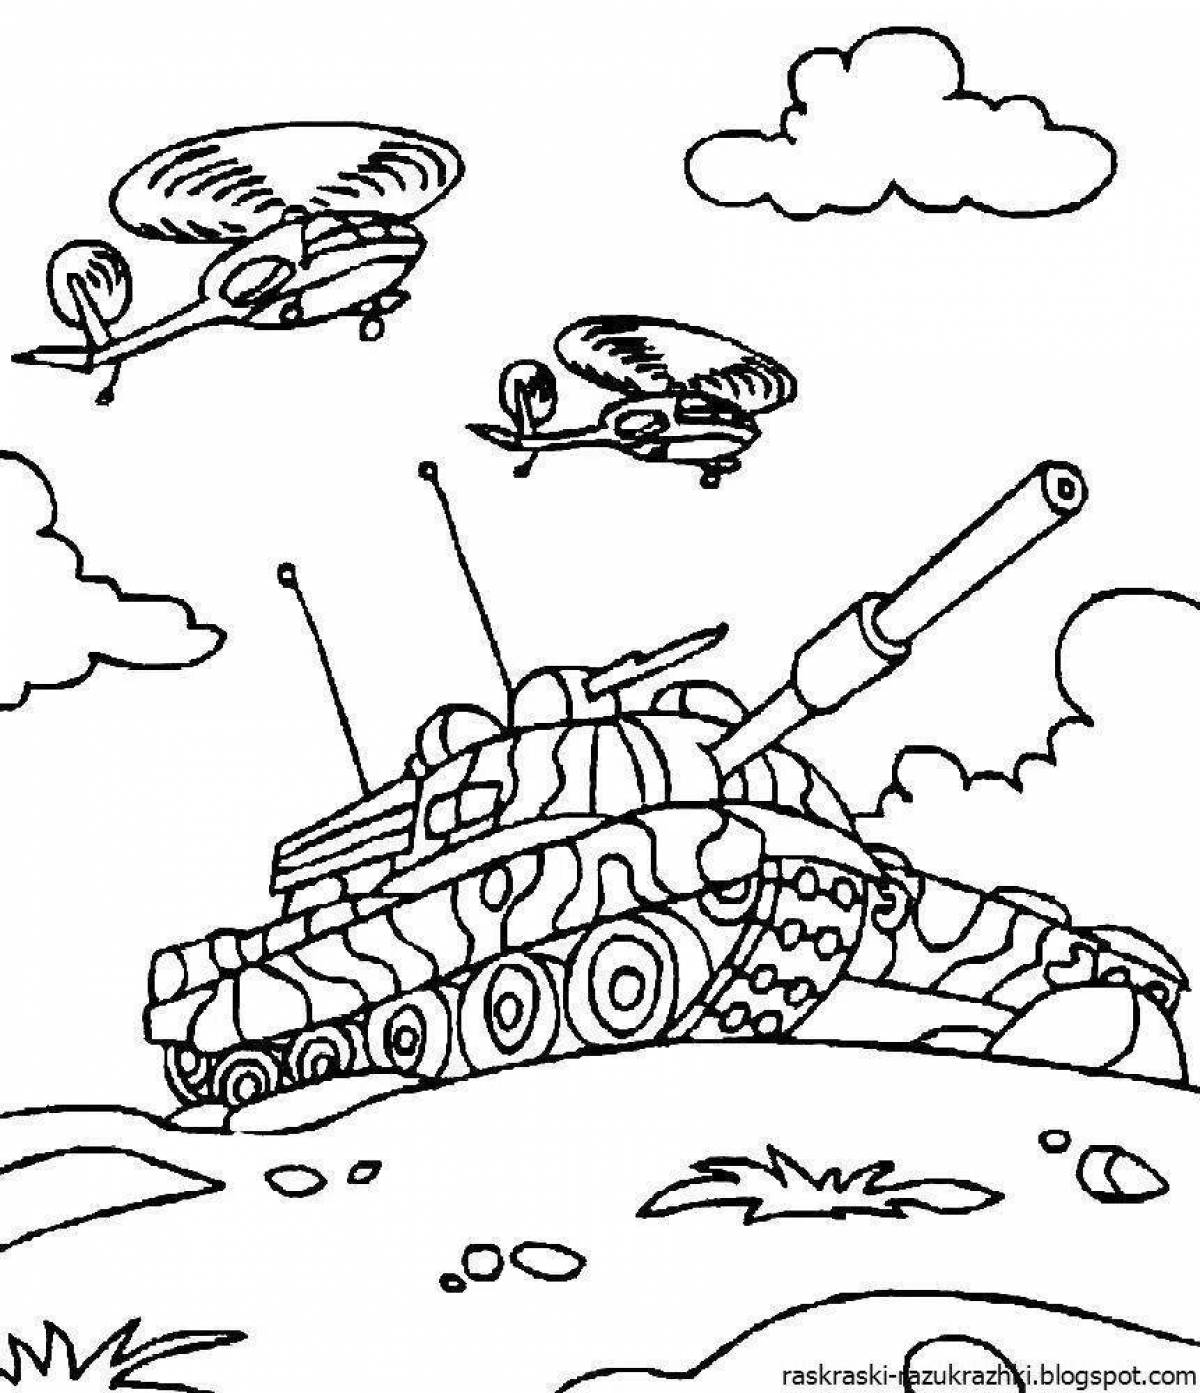 Glorious military coloring book for 6-7 year olds